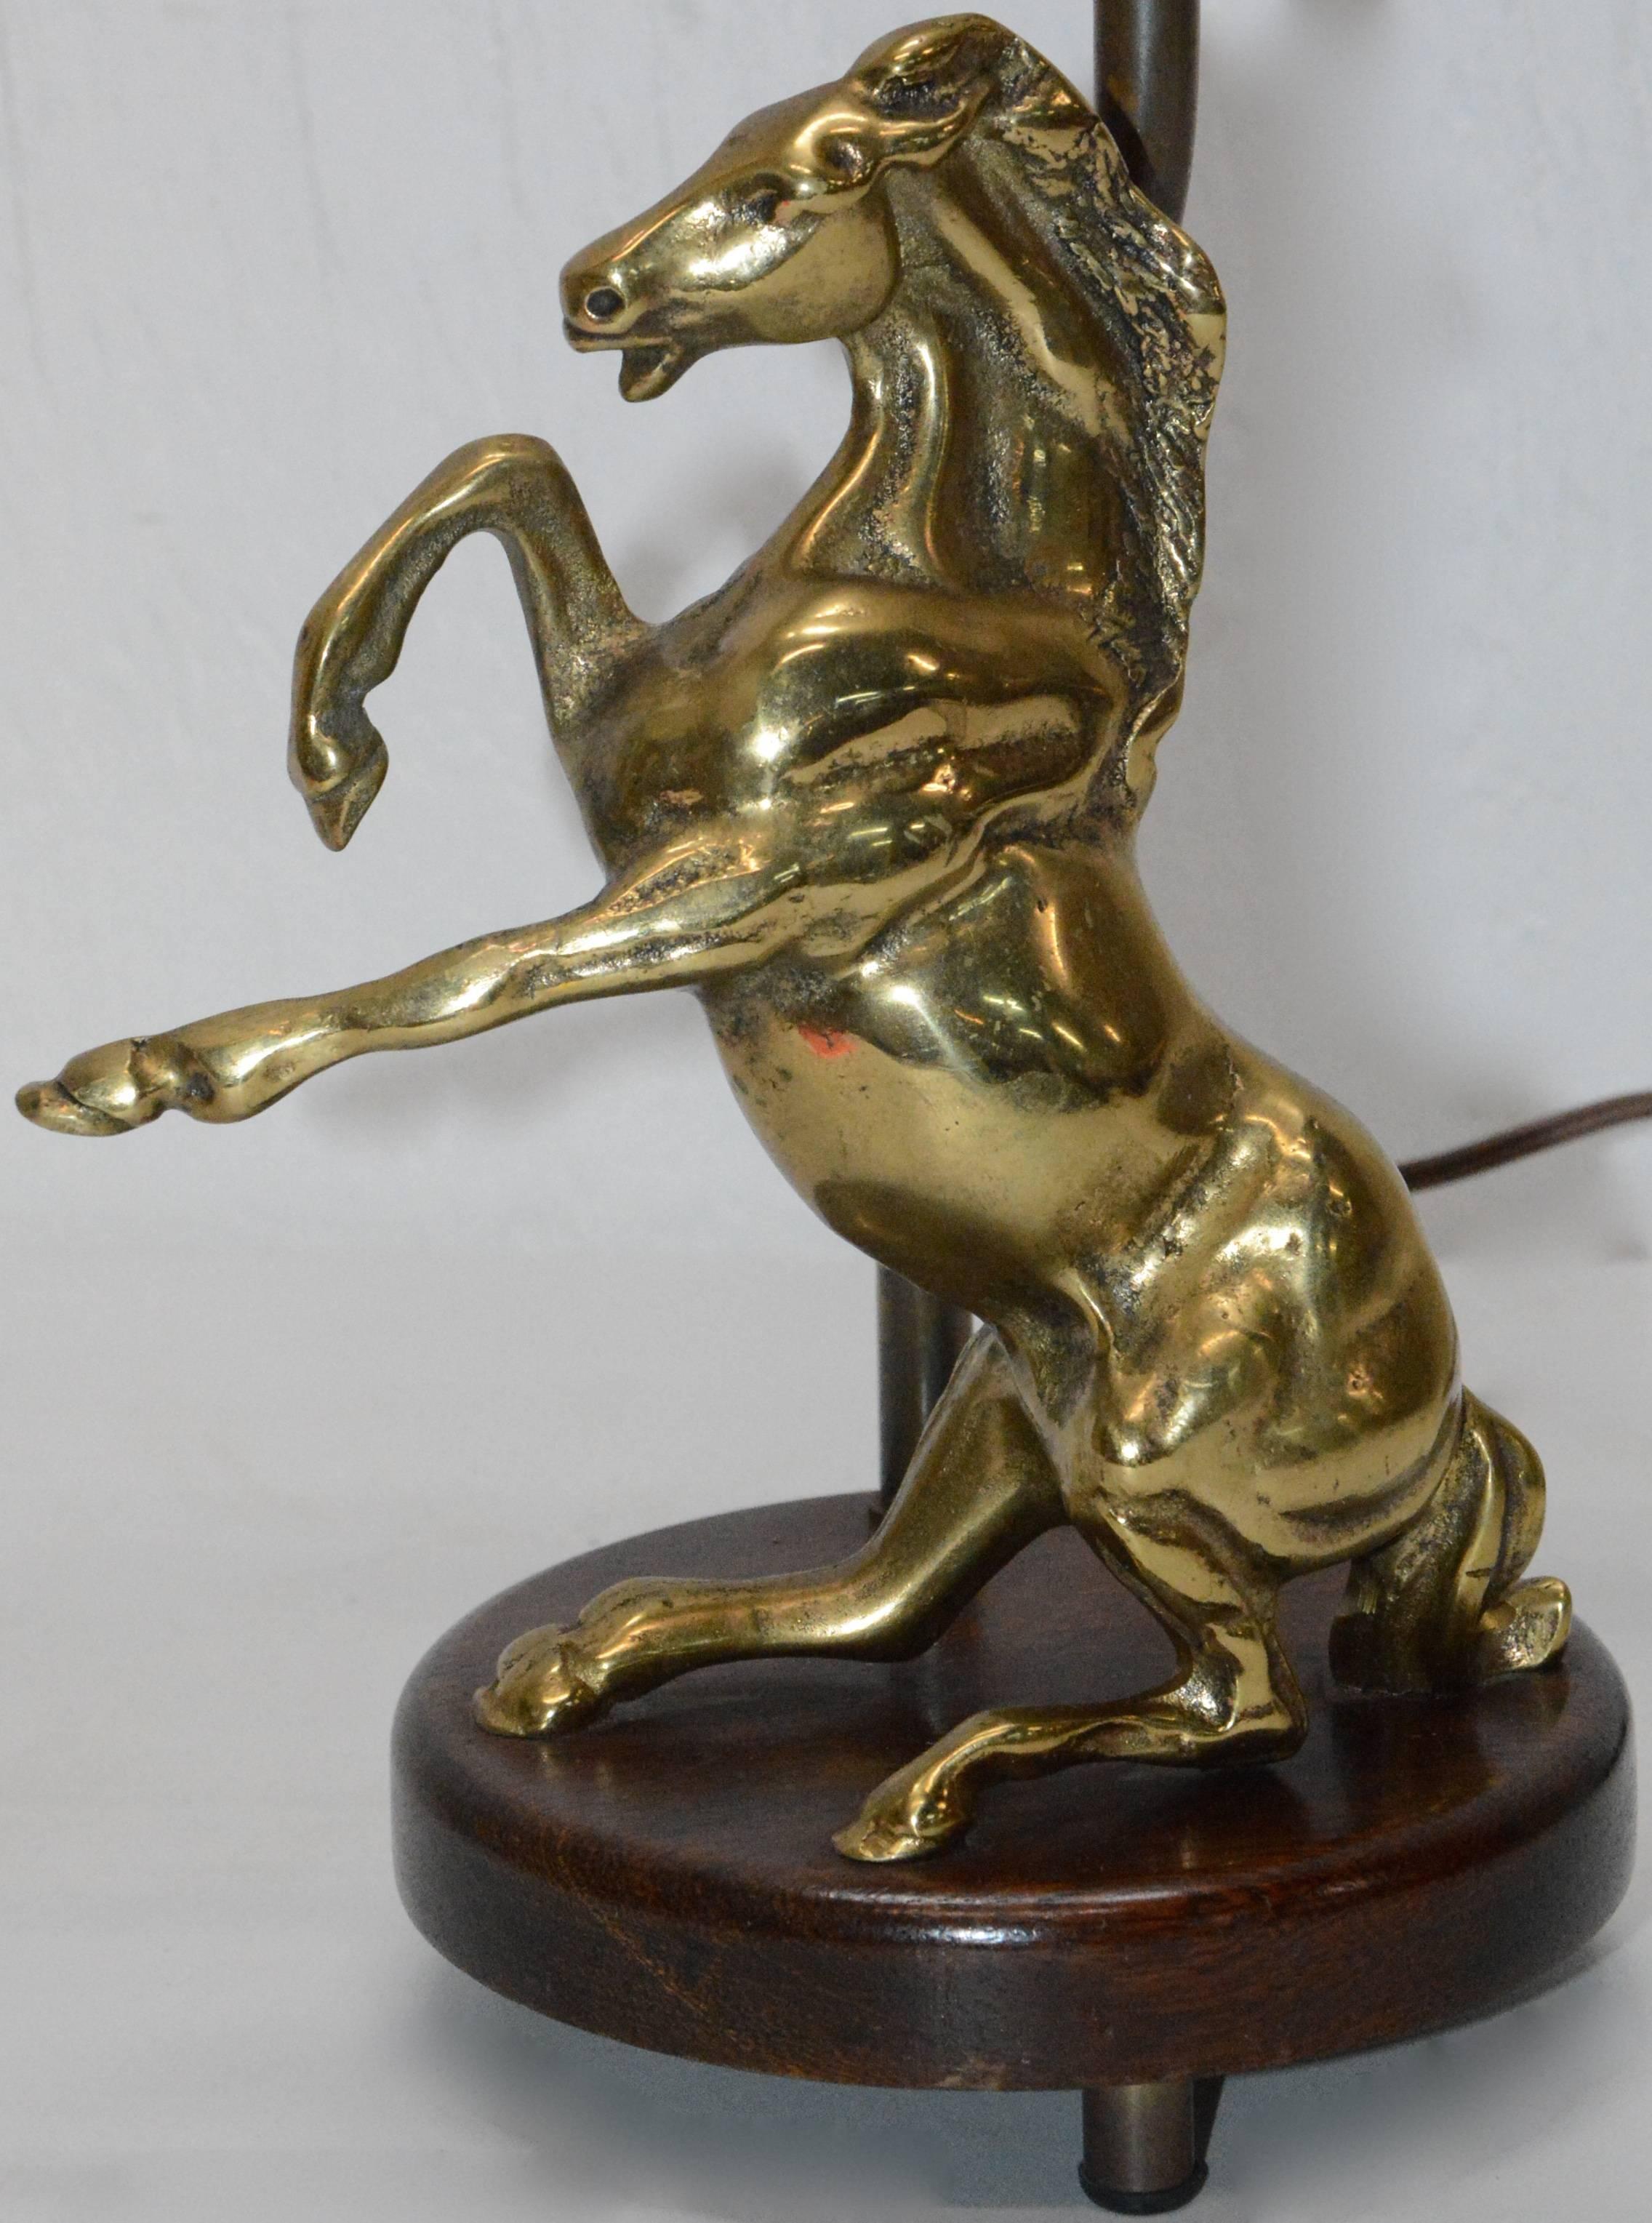 We are offering a vintage table lamp consisting of a round wooden base with a dark walnut stain. A polished, solid brass rearing horse sits atop the wooden base. The lamp is topped with a raw silk, brown colored shade with a hard lining and around